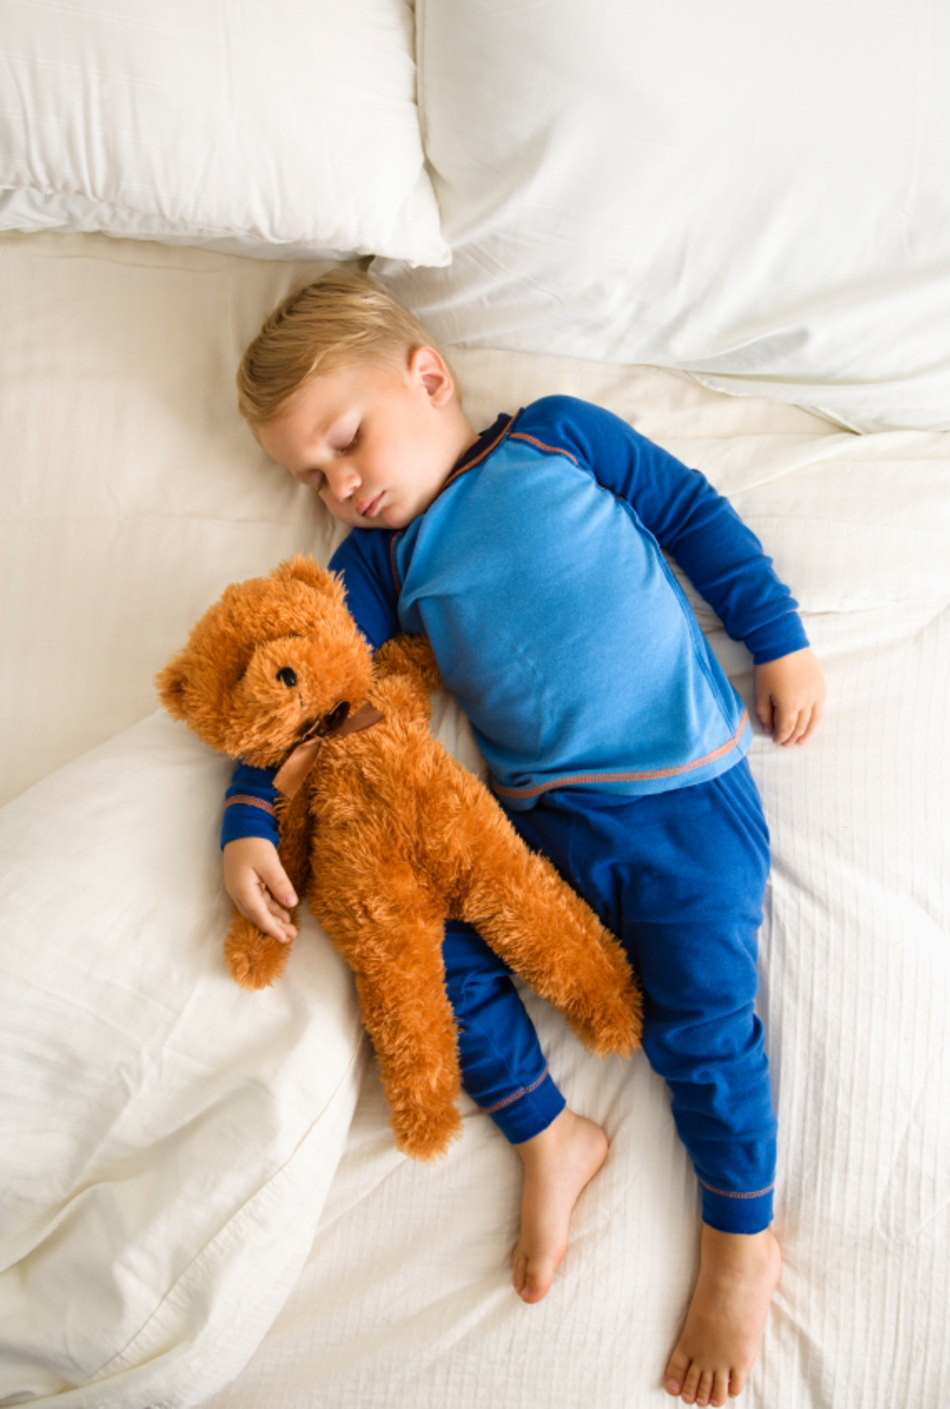 Bedwetting is Normal in Young Children